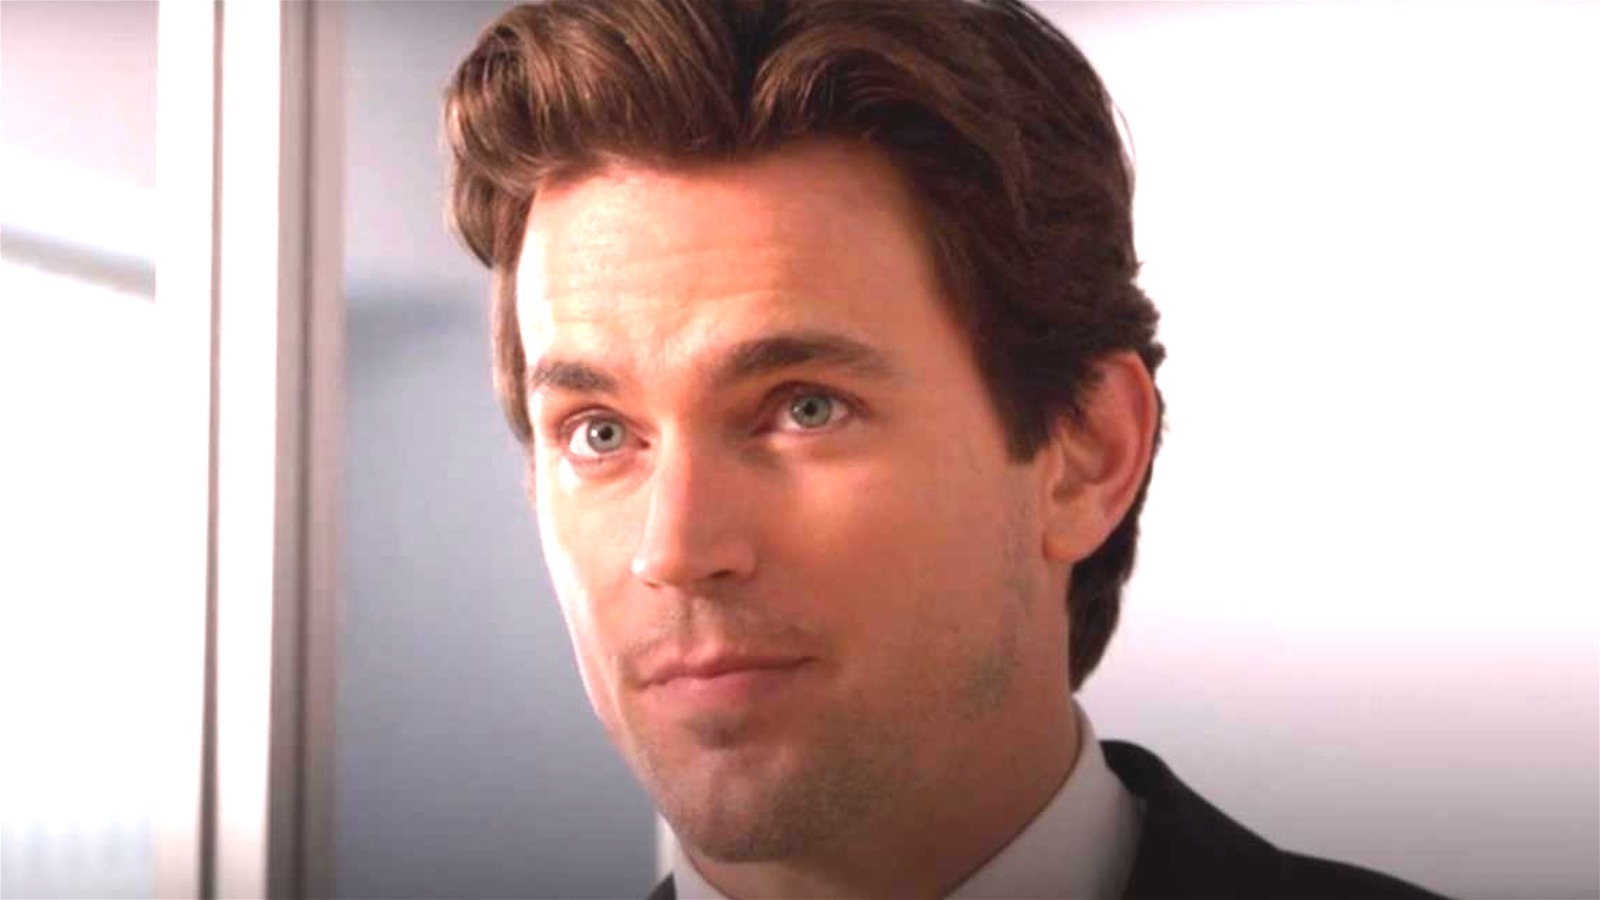 Neal Caffrey - White Collar - Do I really need to say anything